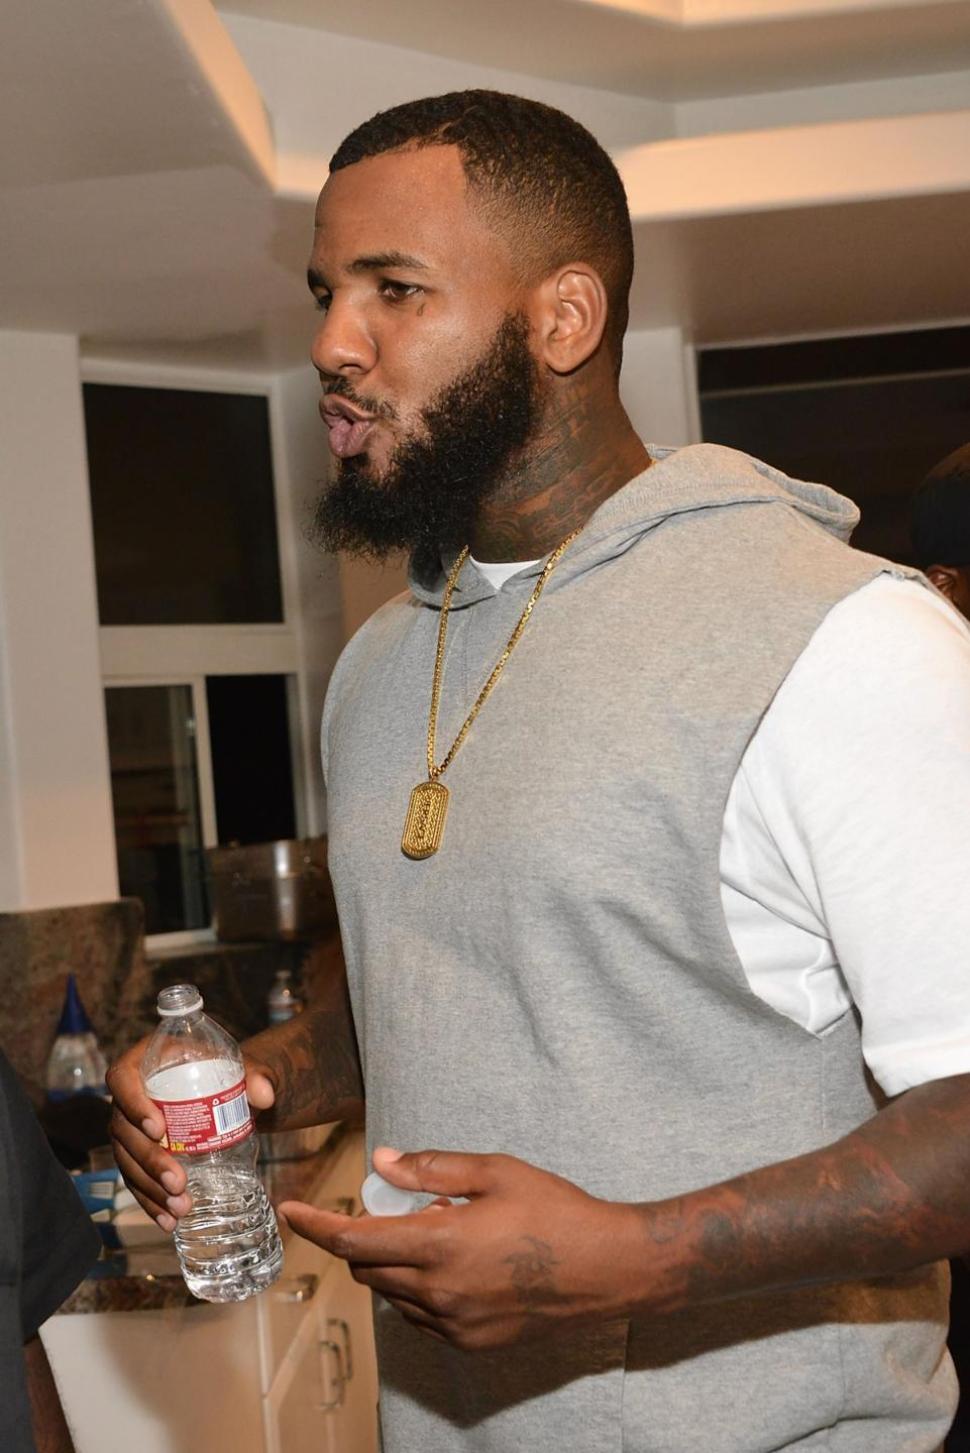 The Game, born Jayceon Terrell Taylor, was reportedly denied entry into Chris Brown’s pre-VMAs party at 1OAK. But photos appear to show him at the party on Aug. 23 in Los Angeles.